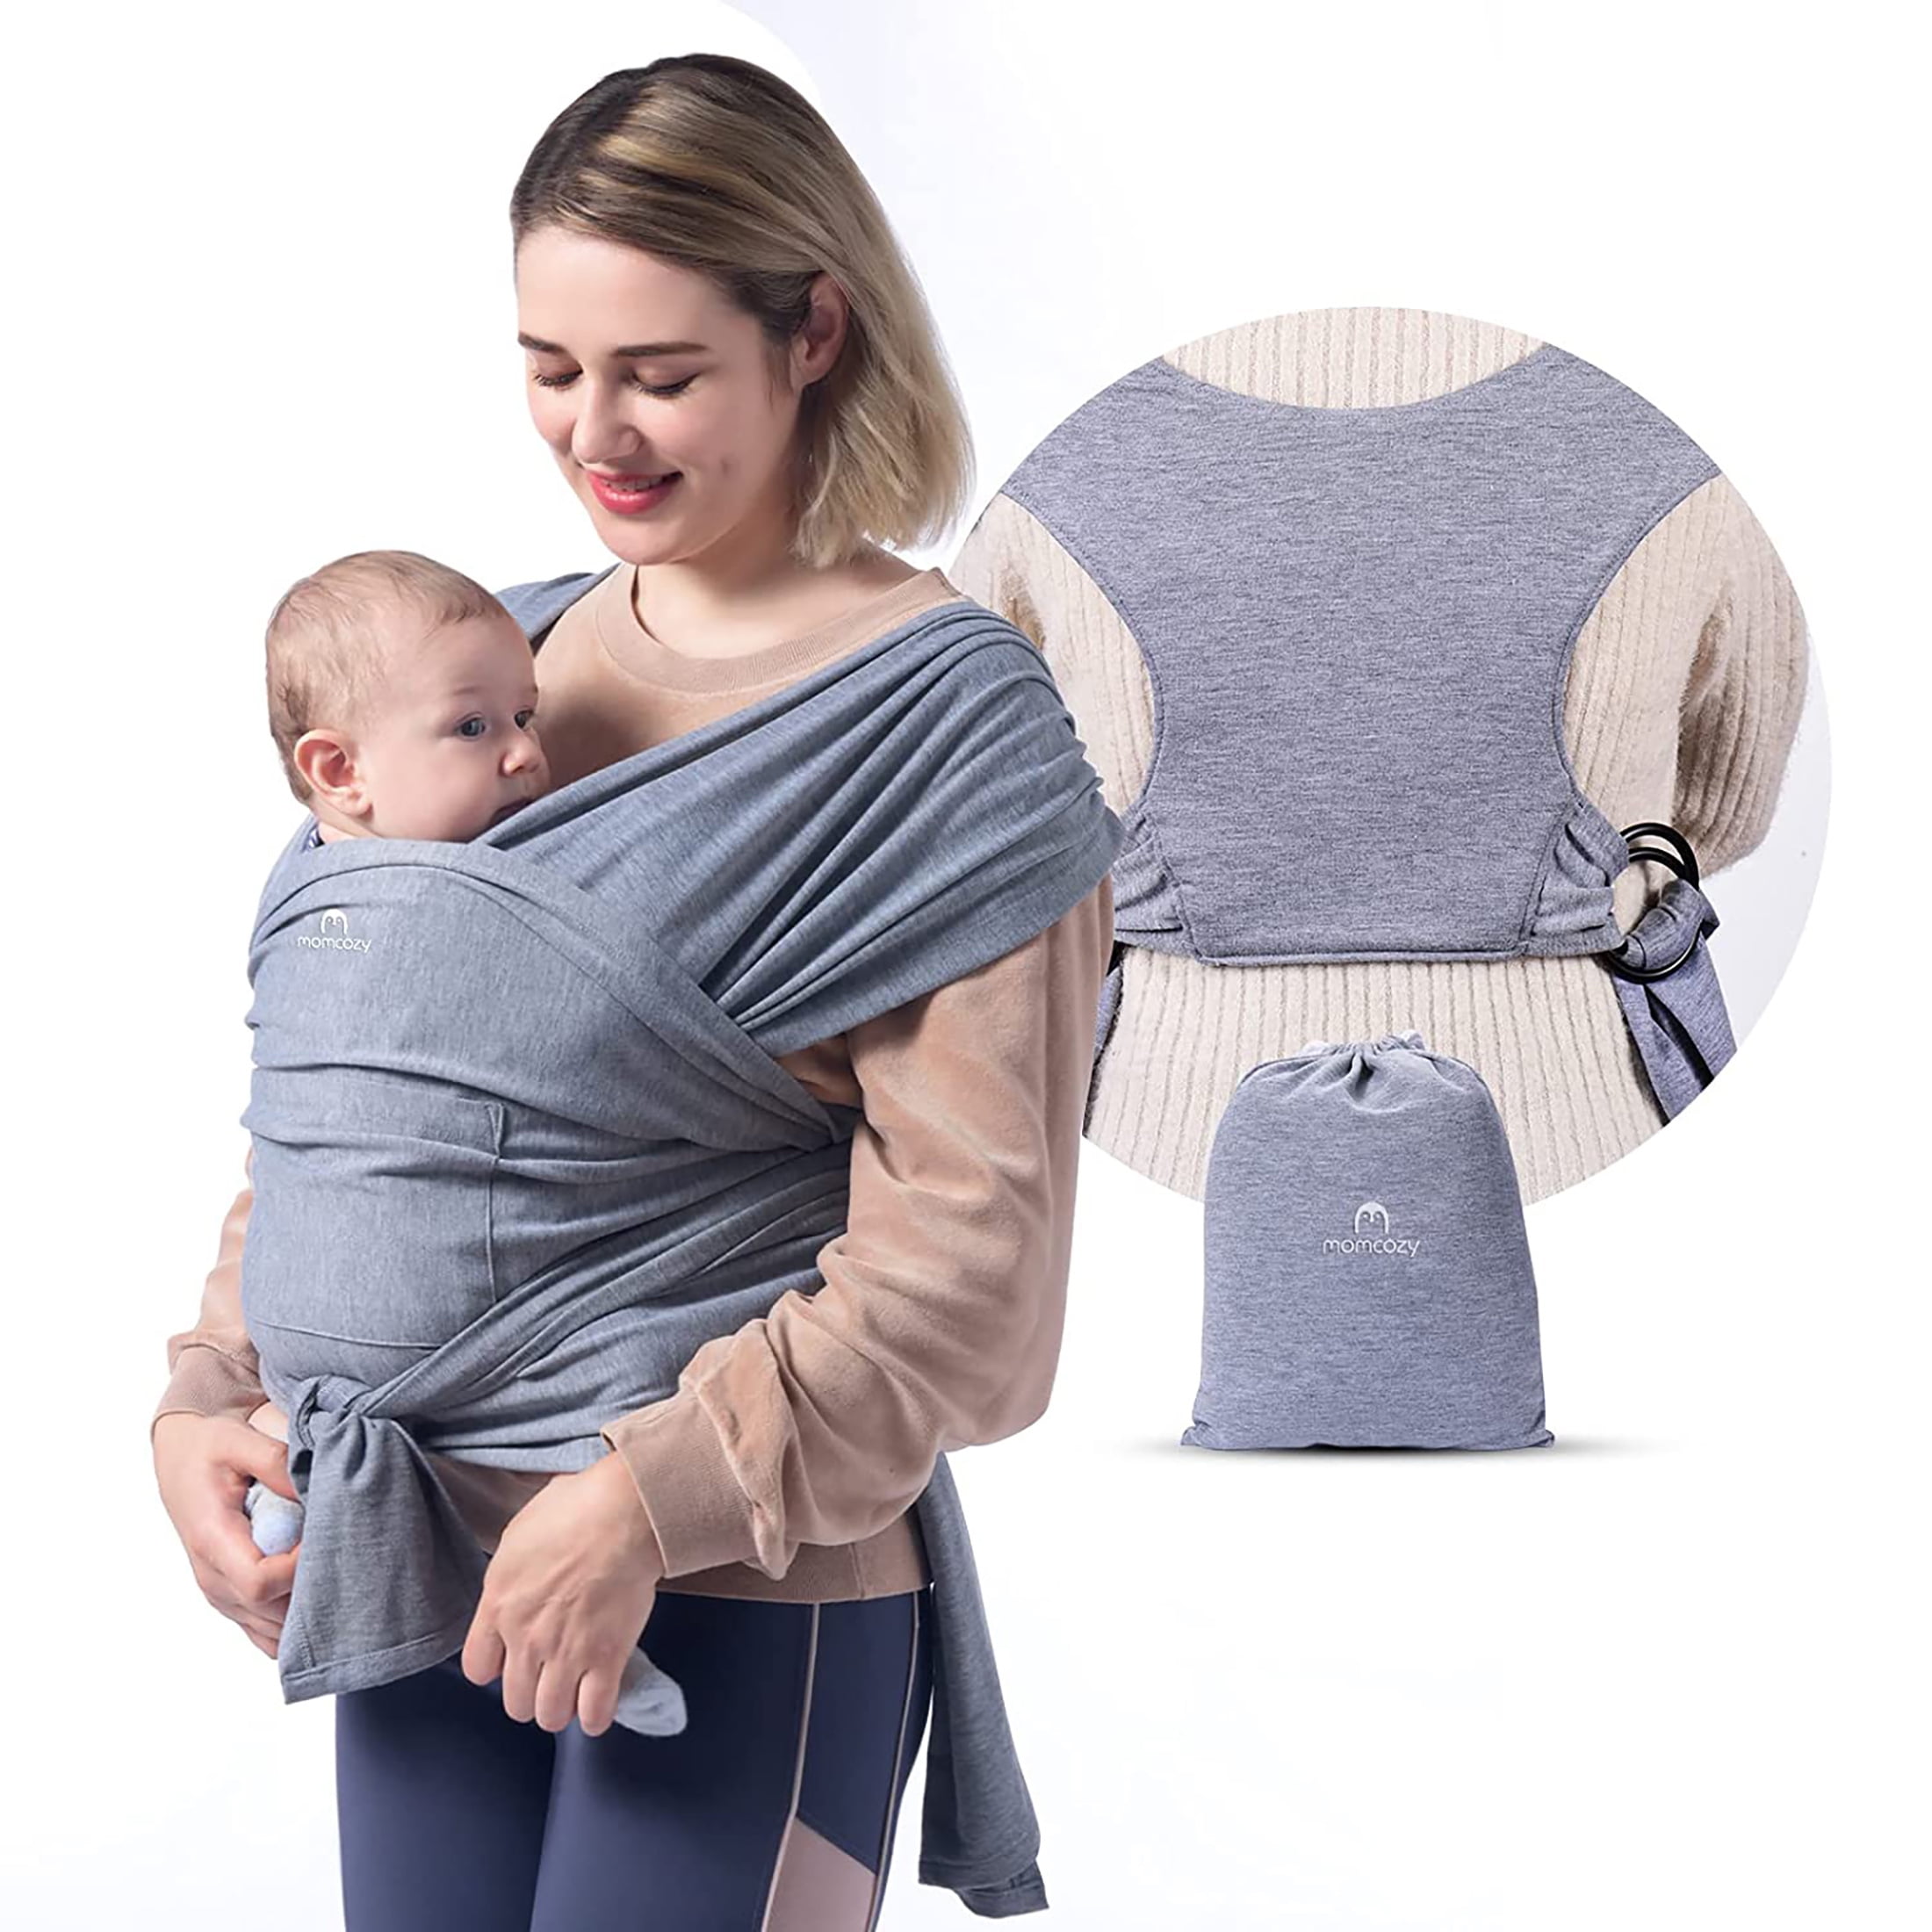 Momcozy Baby Wrap Carrier Slings & Universal Stroller Organizer with Insulated Cup Holder Hands Free for Mommy 